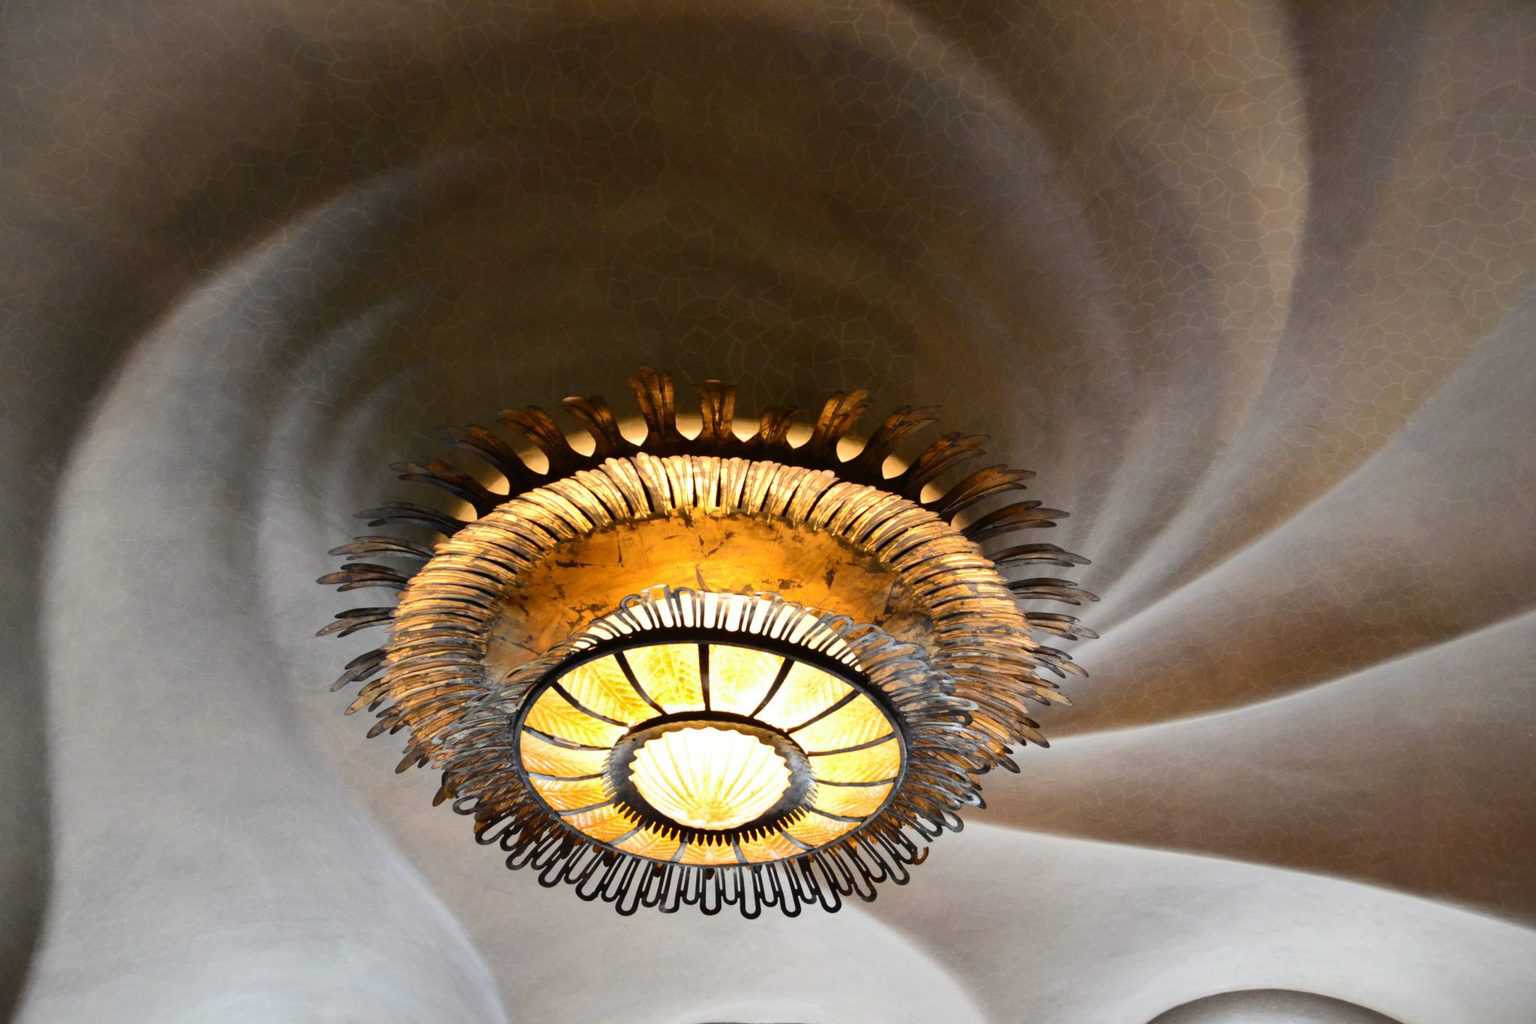 A circular lamp on the ceiling of Casa Batllo. This is a must-see when traveling solo in Barcelona.